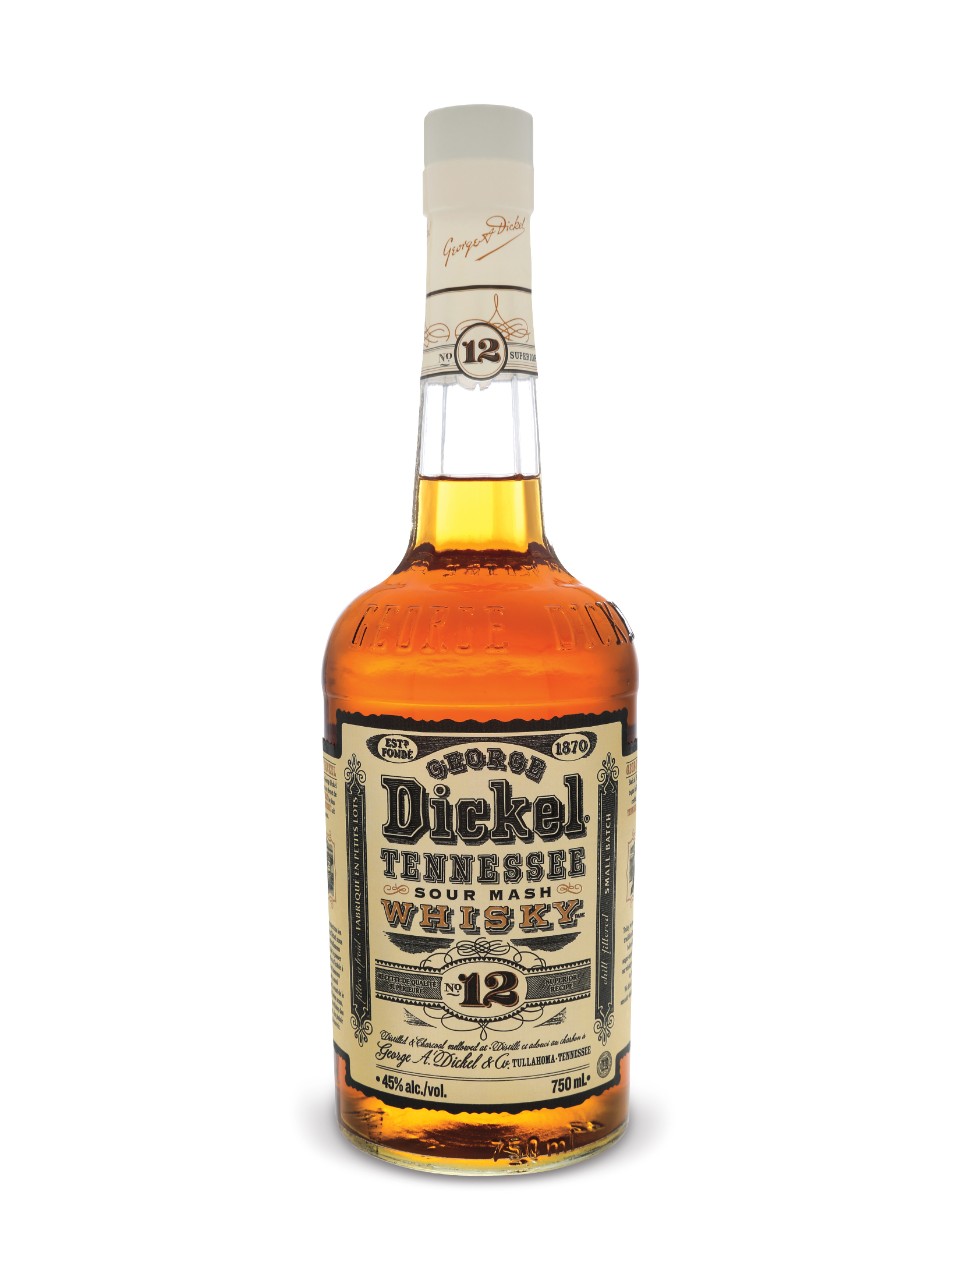 7. Tennessee Whiskey – George Dickel Superior No. 12